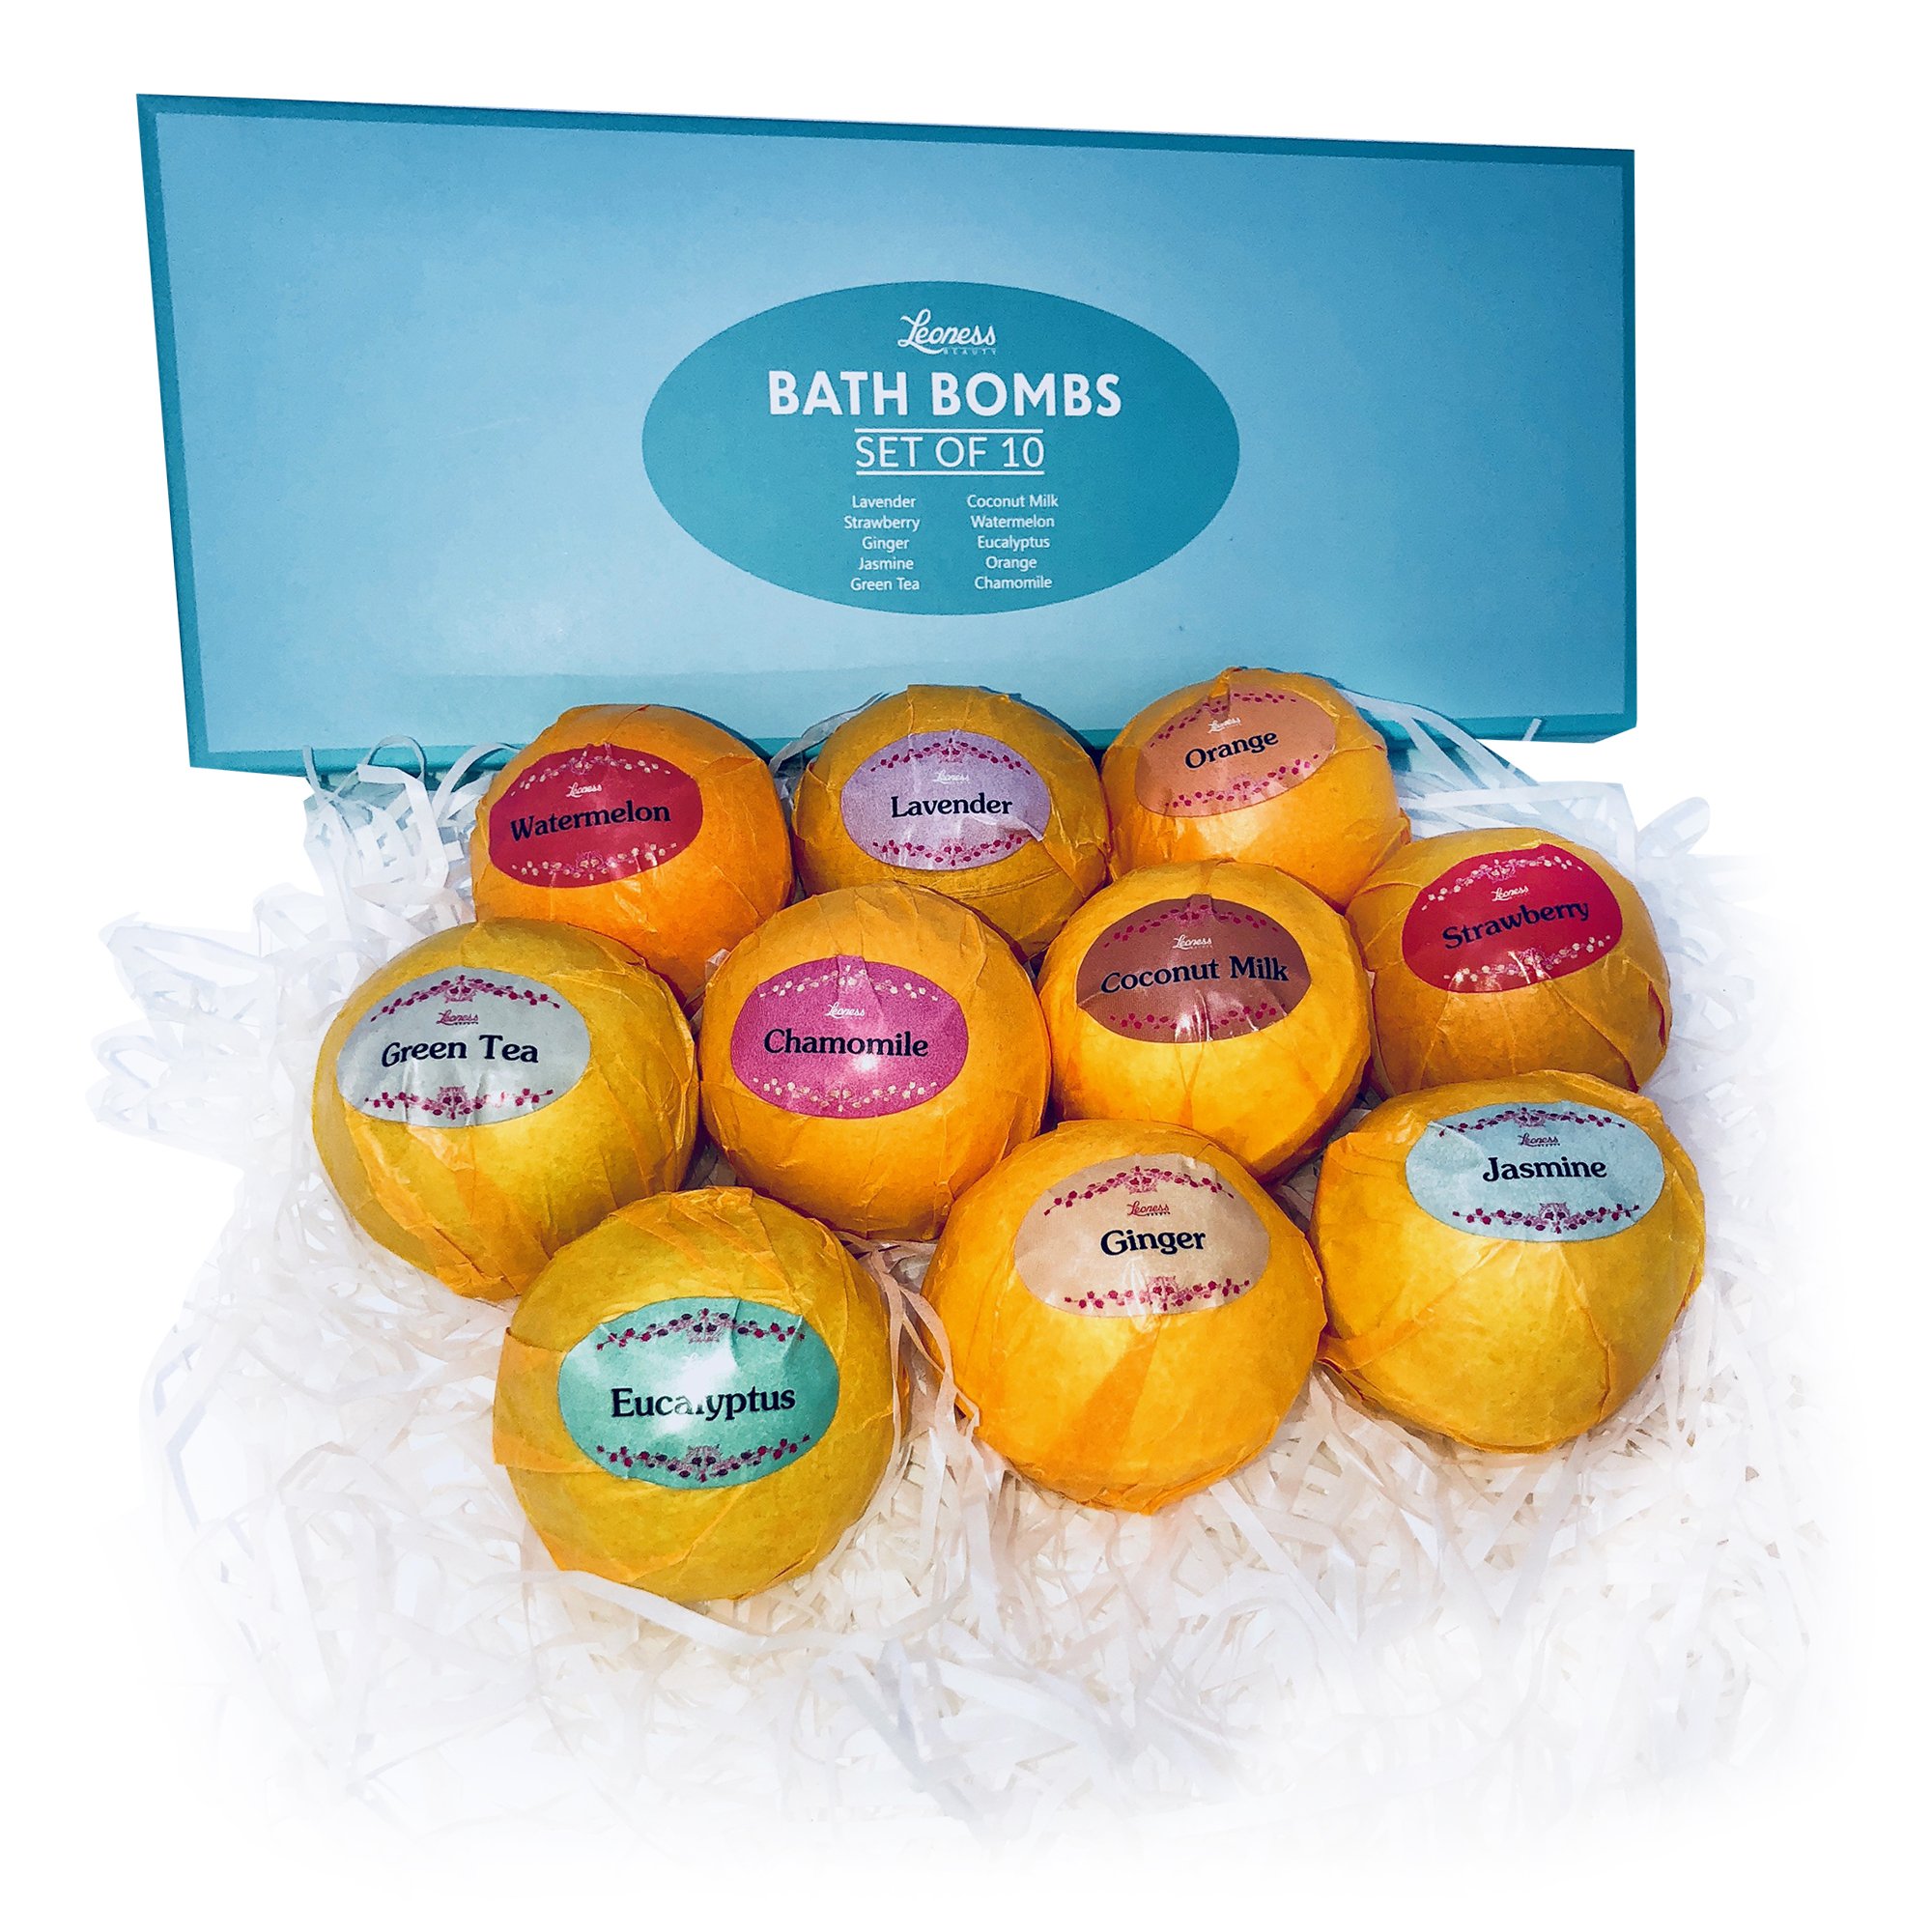 Bath Bombs Gift Set – 10 Unique Scents – Great Gift idea for Women, Mom, Girls, Teens, Graduation, Valentines Day, and Birthdays – Spa Aromatherapy - Relaxation in a Box